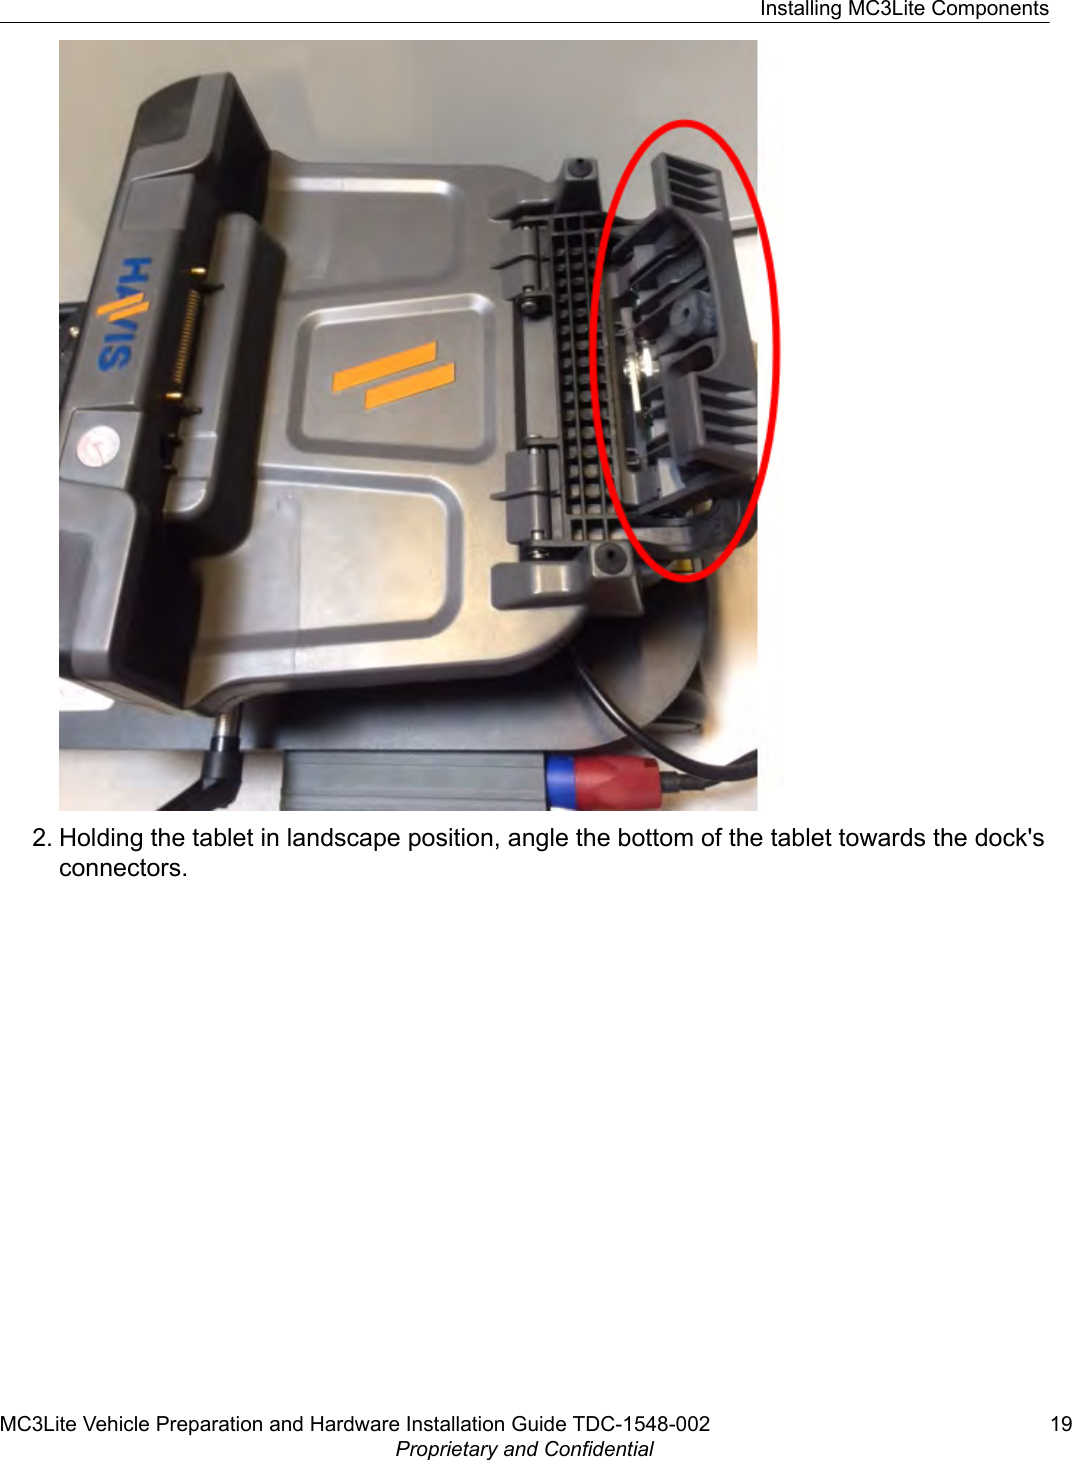 2. Holding the tablet in landscape position, angle the bottom of the tablet towards the dock&apos;sconnectors.Installing MC3Lite ComponentsMC3Lite Vehicle Preparation and Hardware Installation Guide TDC-1548-002 19Proprietary and Confidential